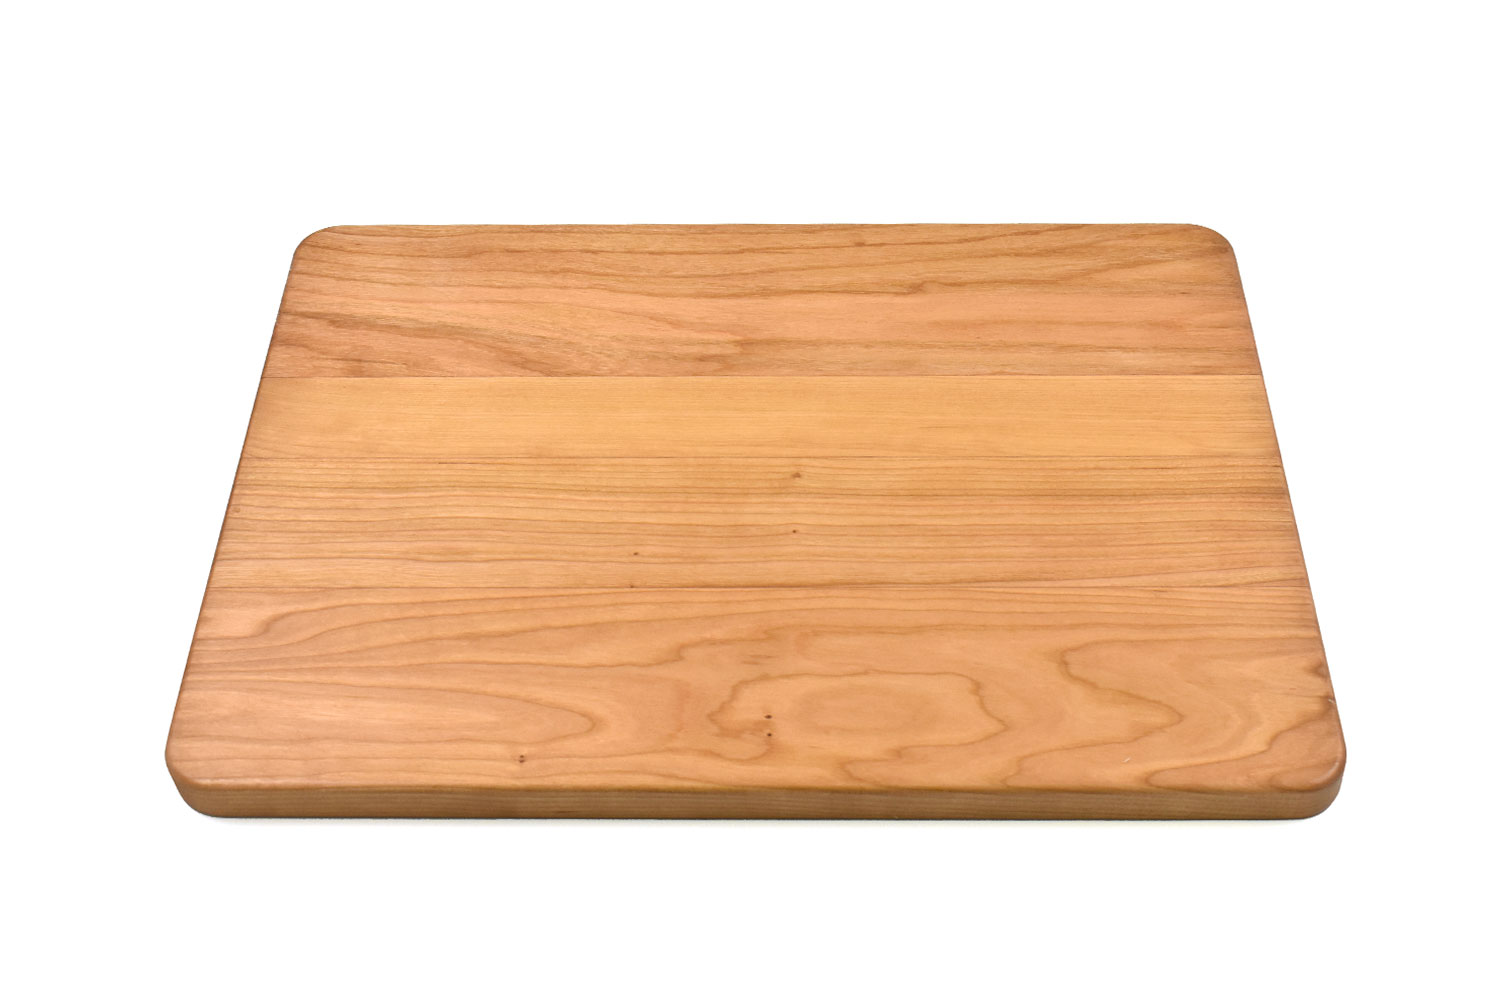 Cutting board rounded corners & edges